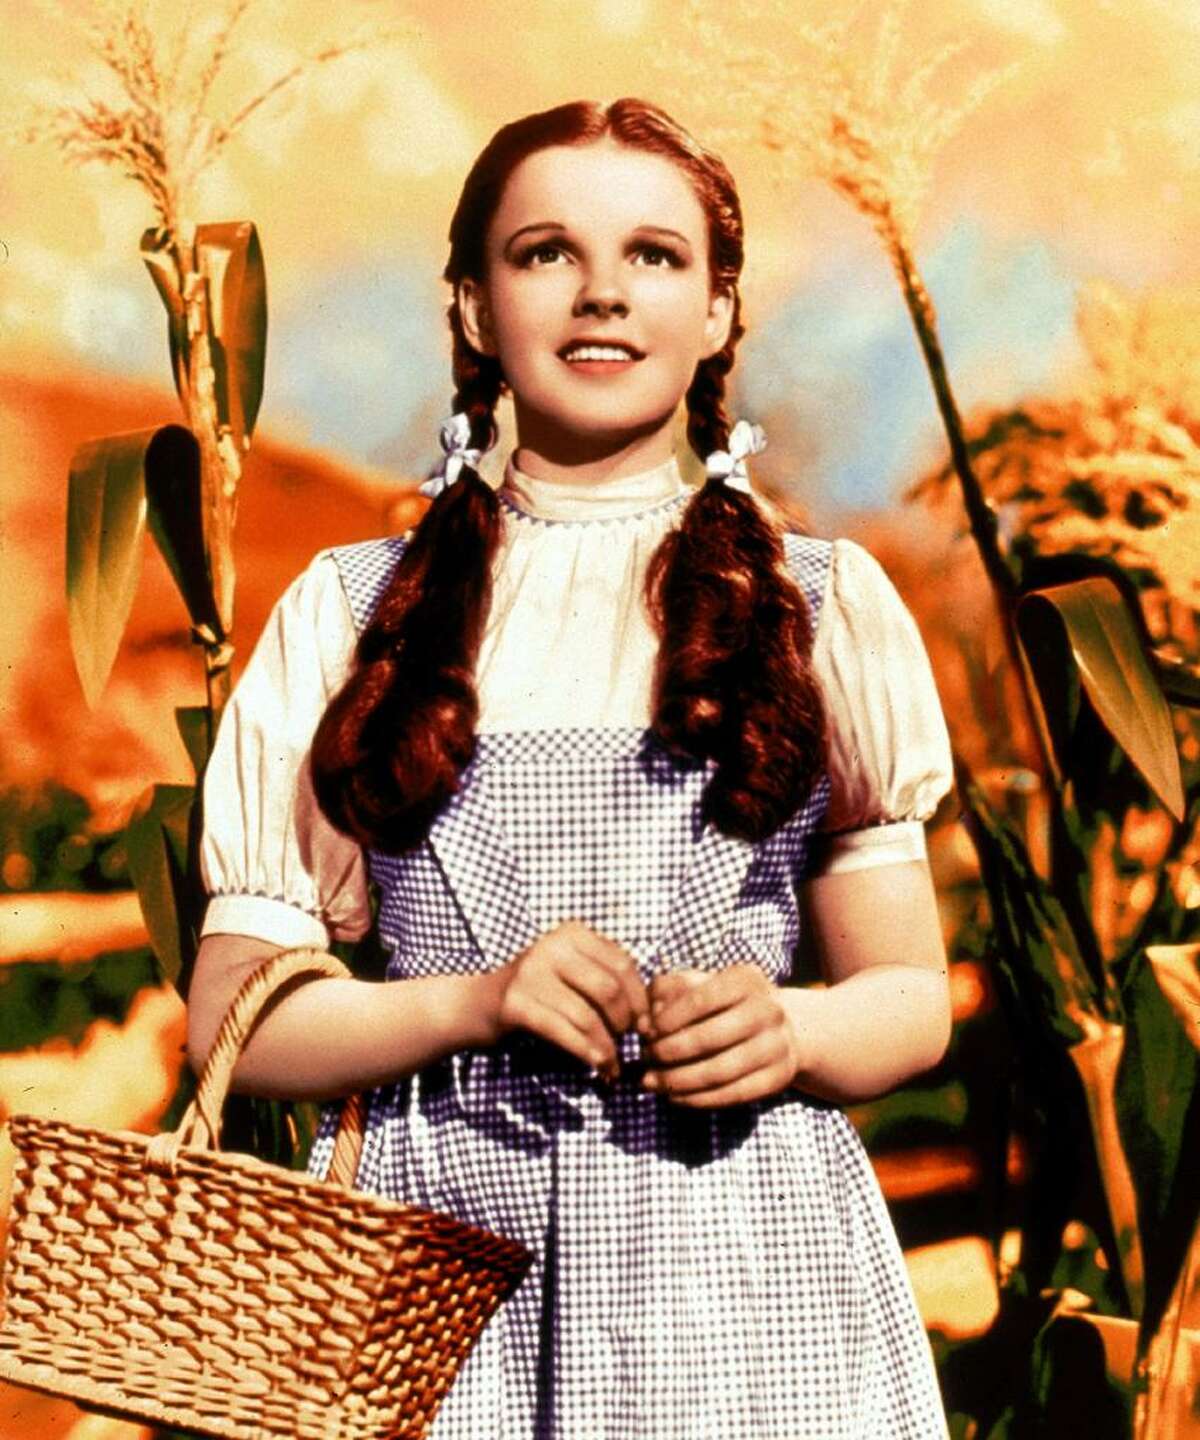 Judy Garland as Dorothy Gale in 1939's "The Wizard of Oz" wore a blue gingham dress that has become one of filmdom's most iconic garments.